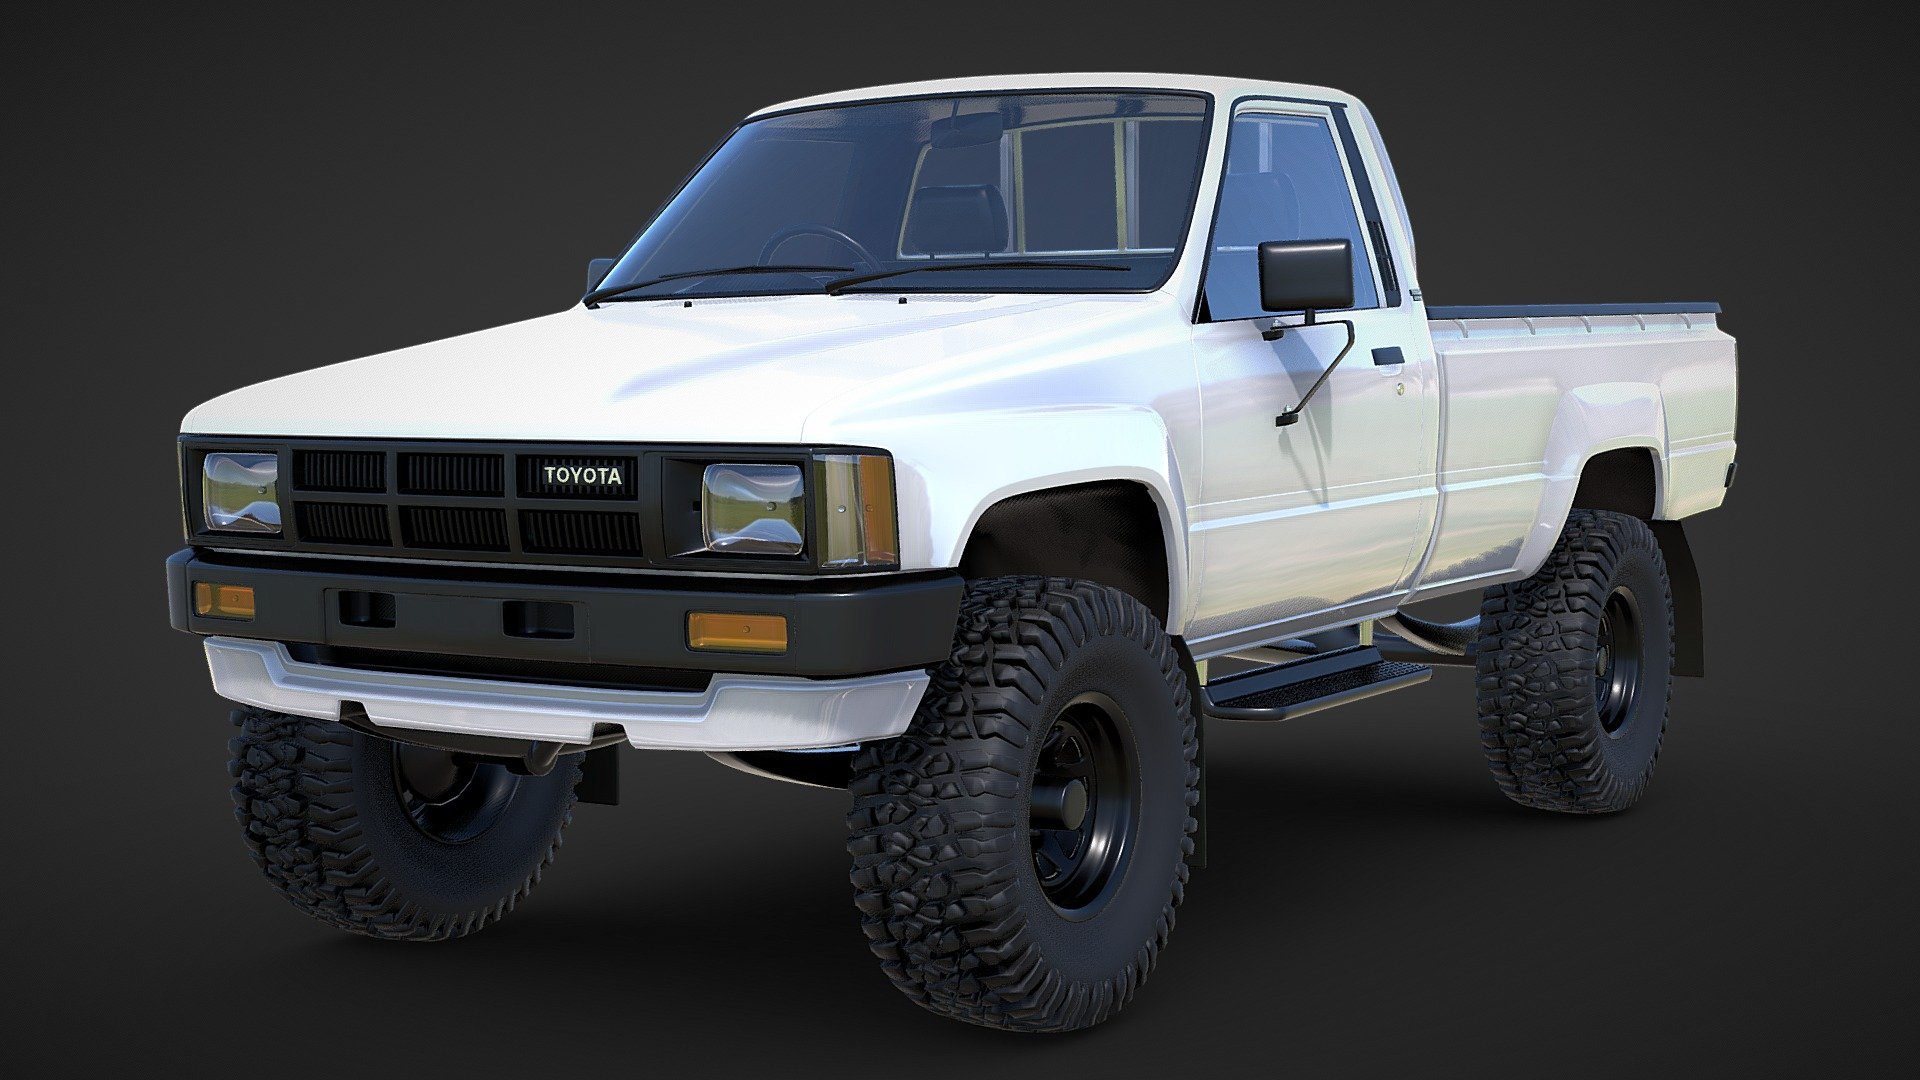 Toyota Hilux 1983 Stock Variation - Toyota Hilux 1983 Stock - Buy Royalty Free 3D model by 4x4 Mania (@4x4Mania) 3d model